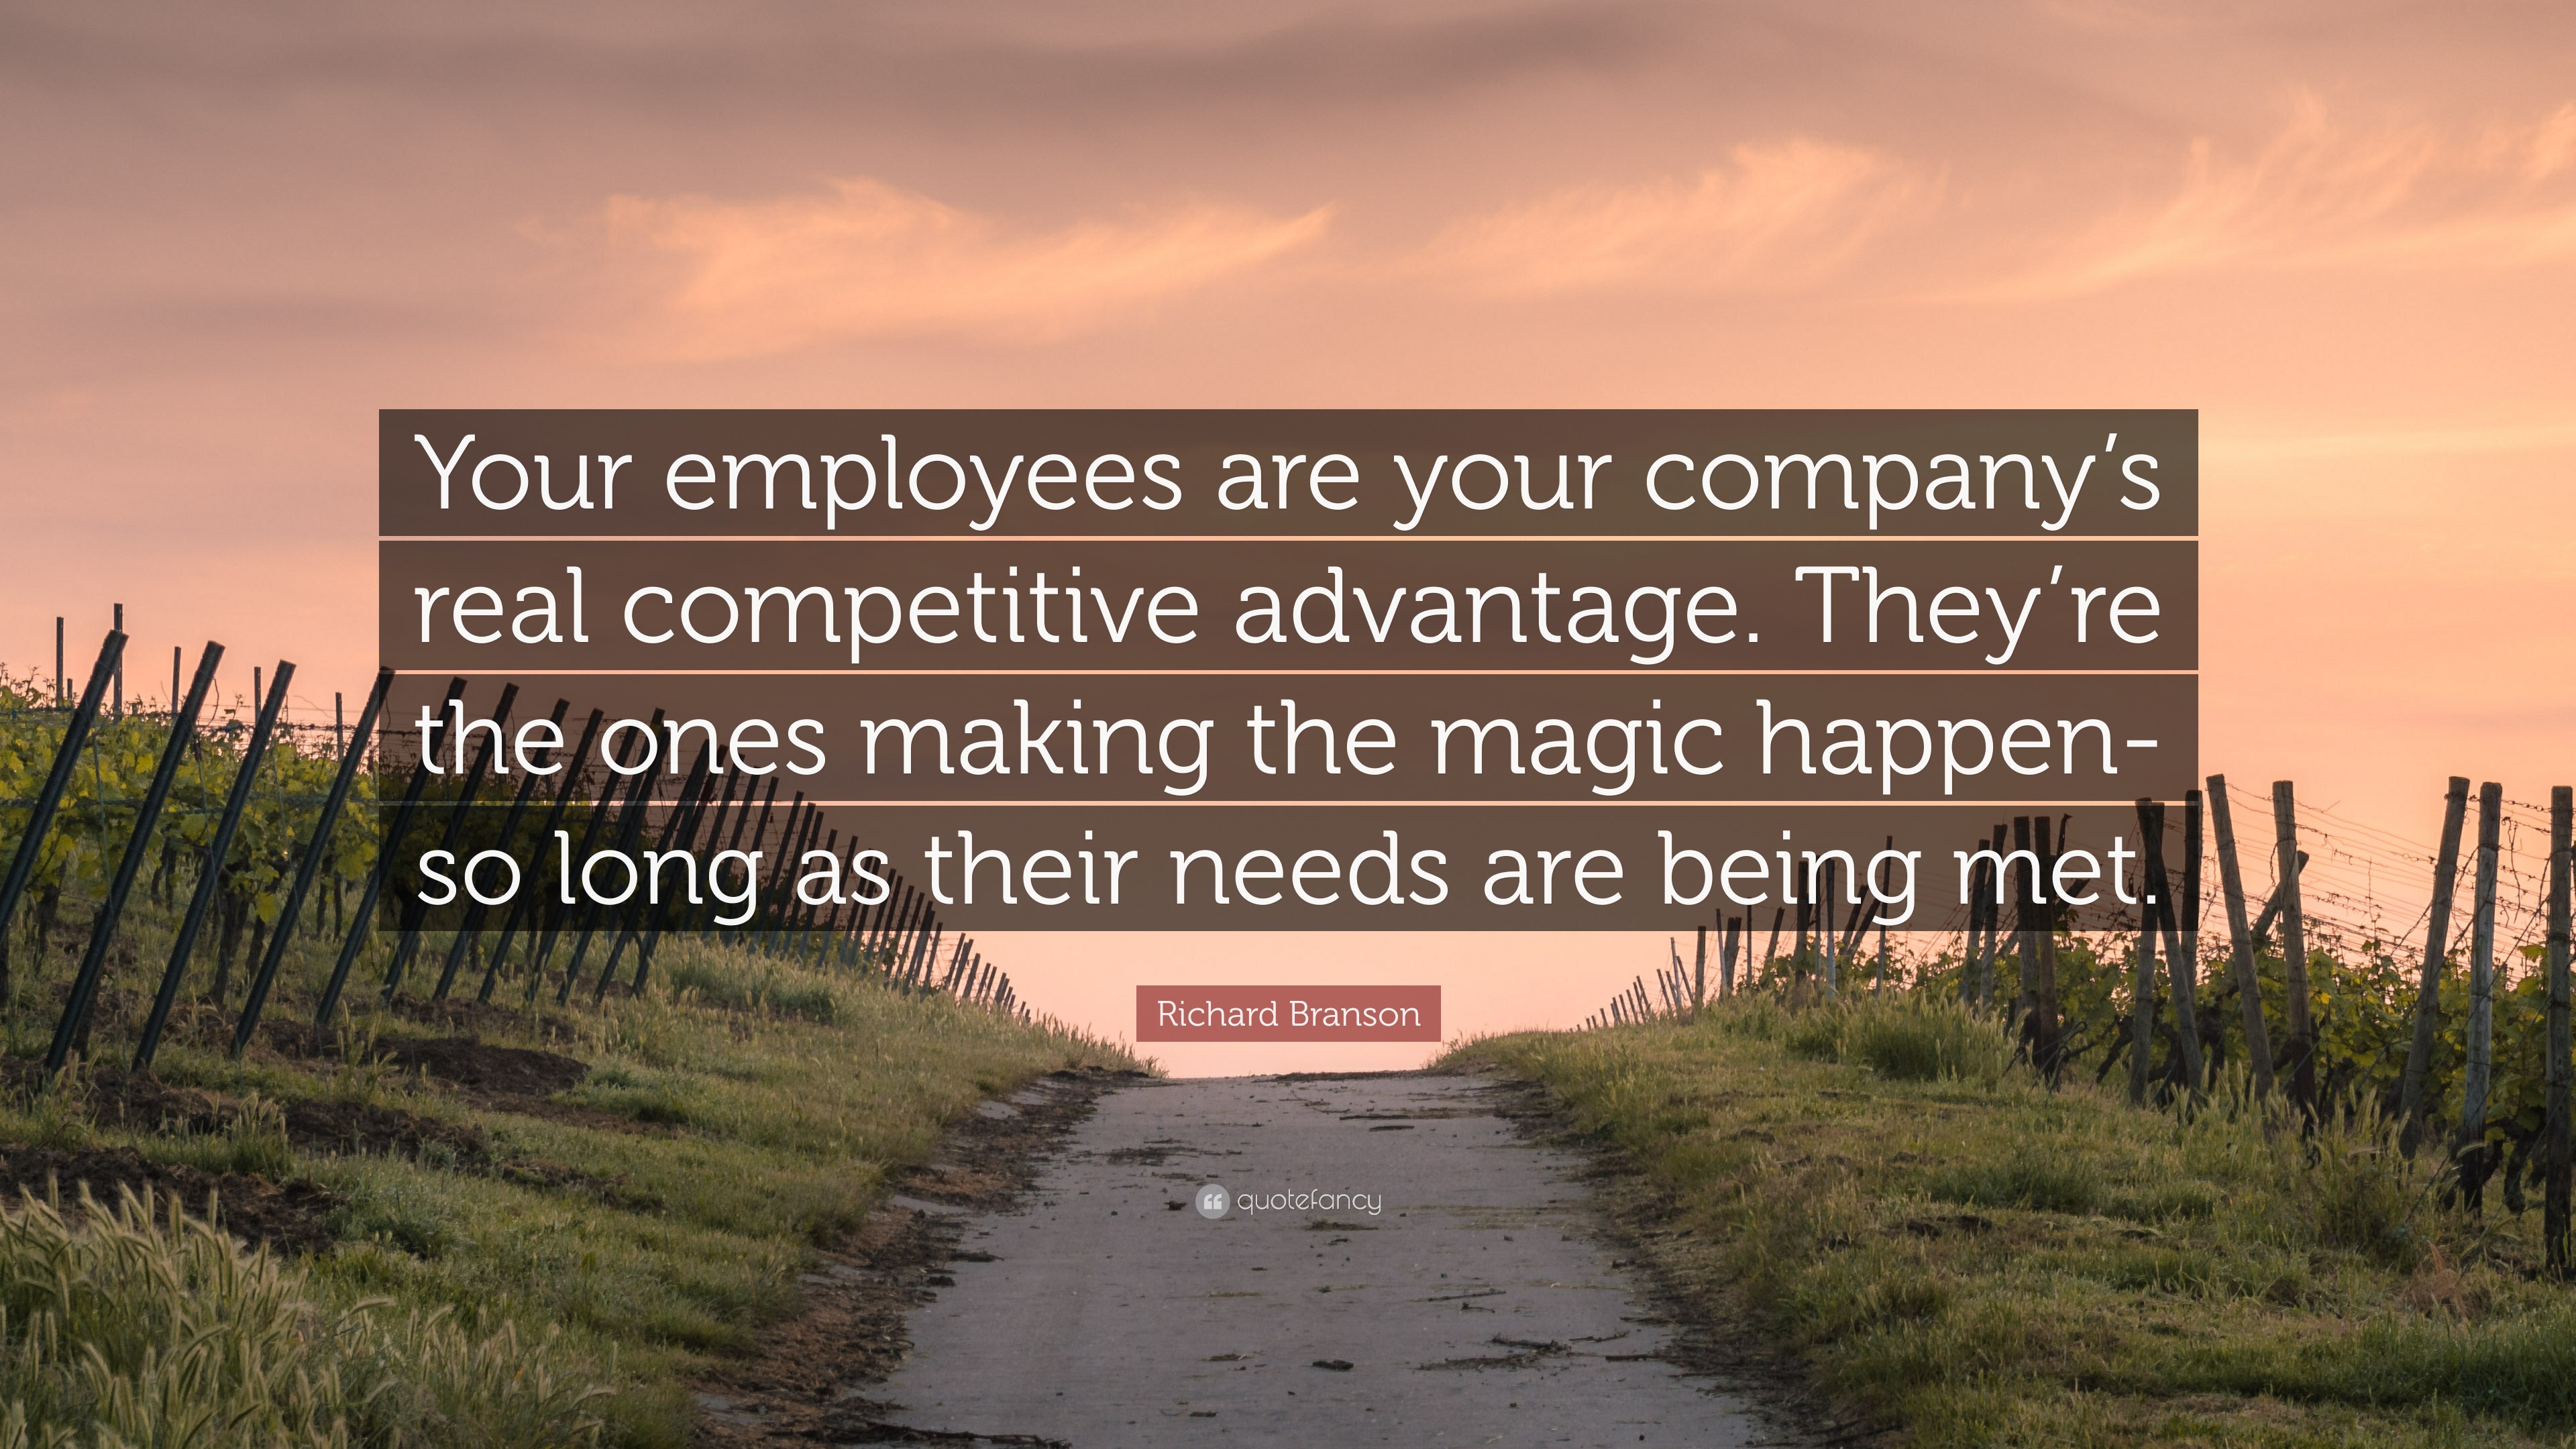 Richard Branson Quote: “Your employees are your company’s real